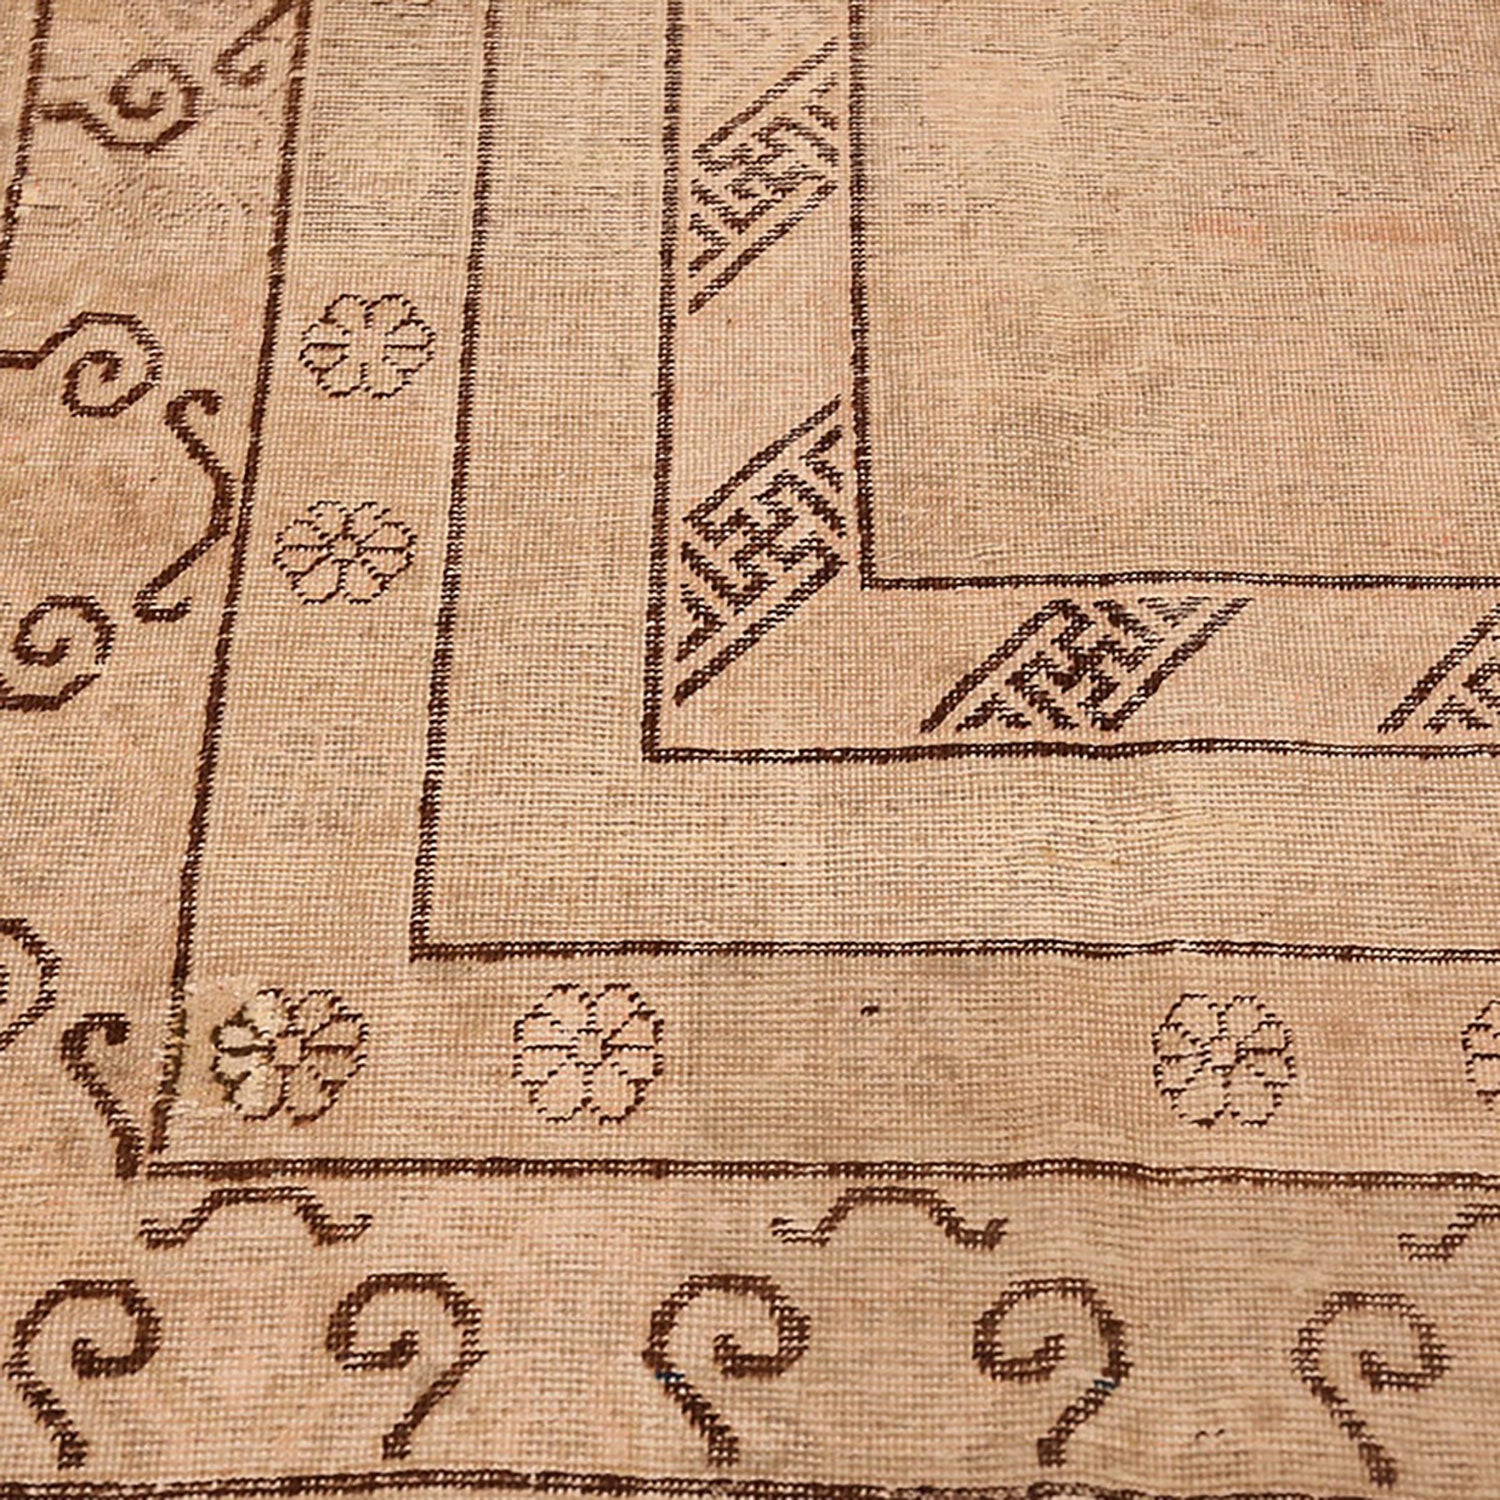 Detailed patterned carpet or rug with geometric borders and floral motifs.